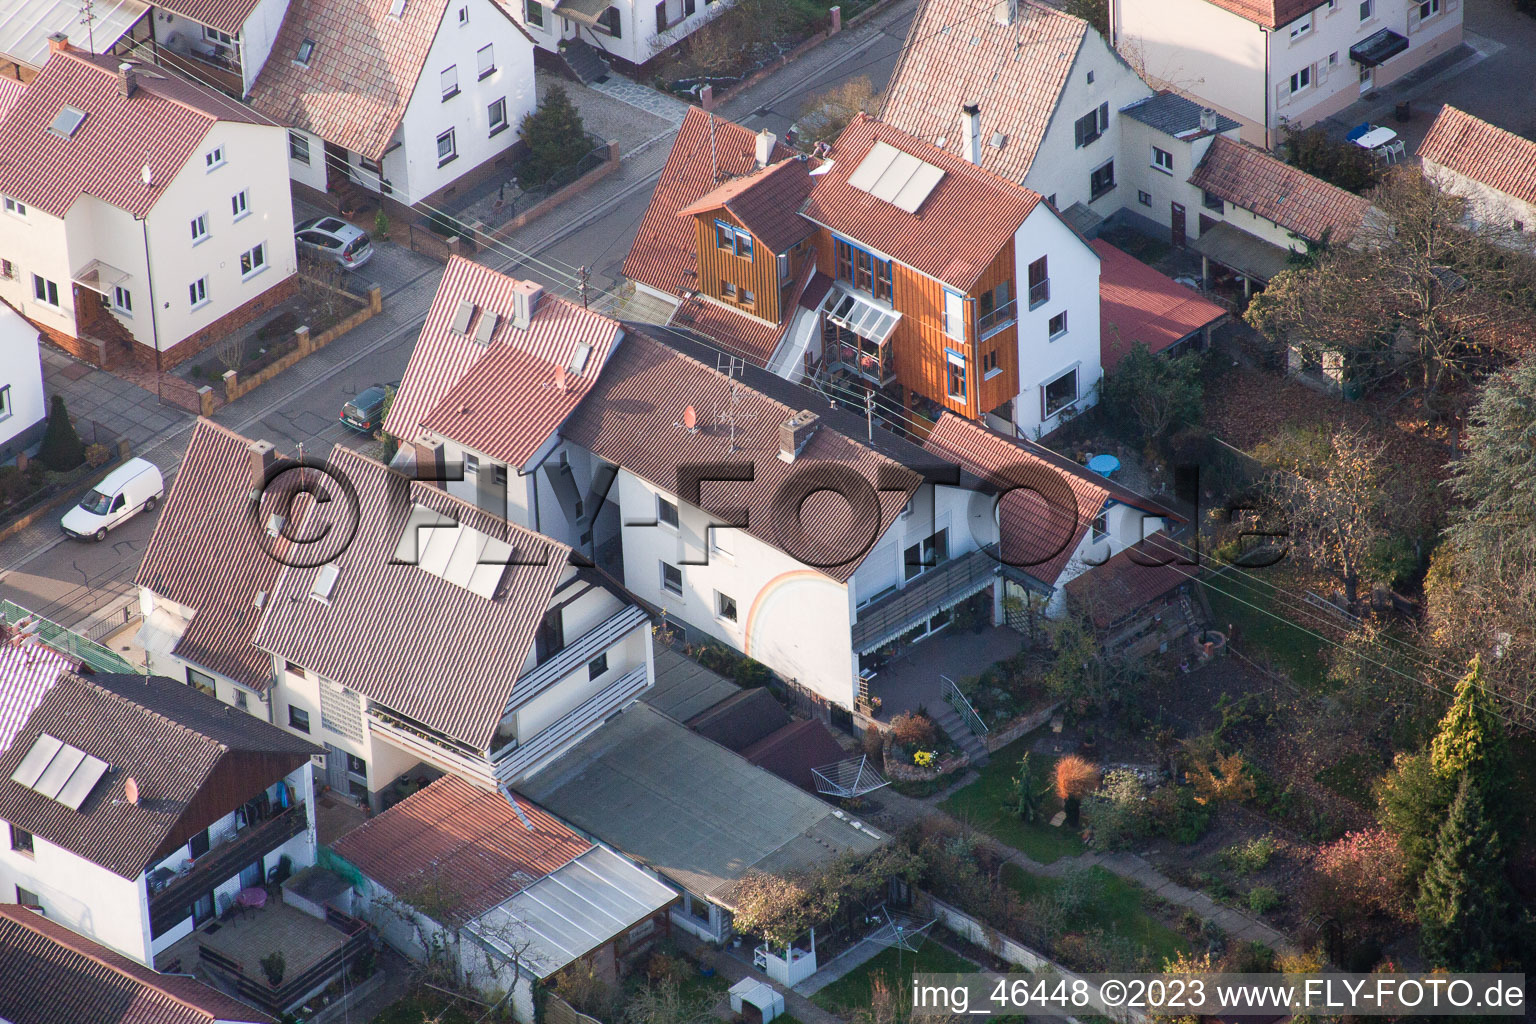 Aerial view of Kandel in the state Rhineland-Palatinate, Germany